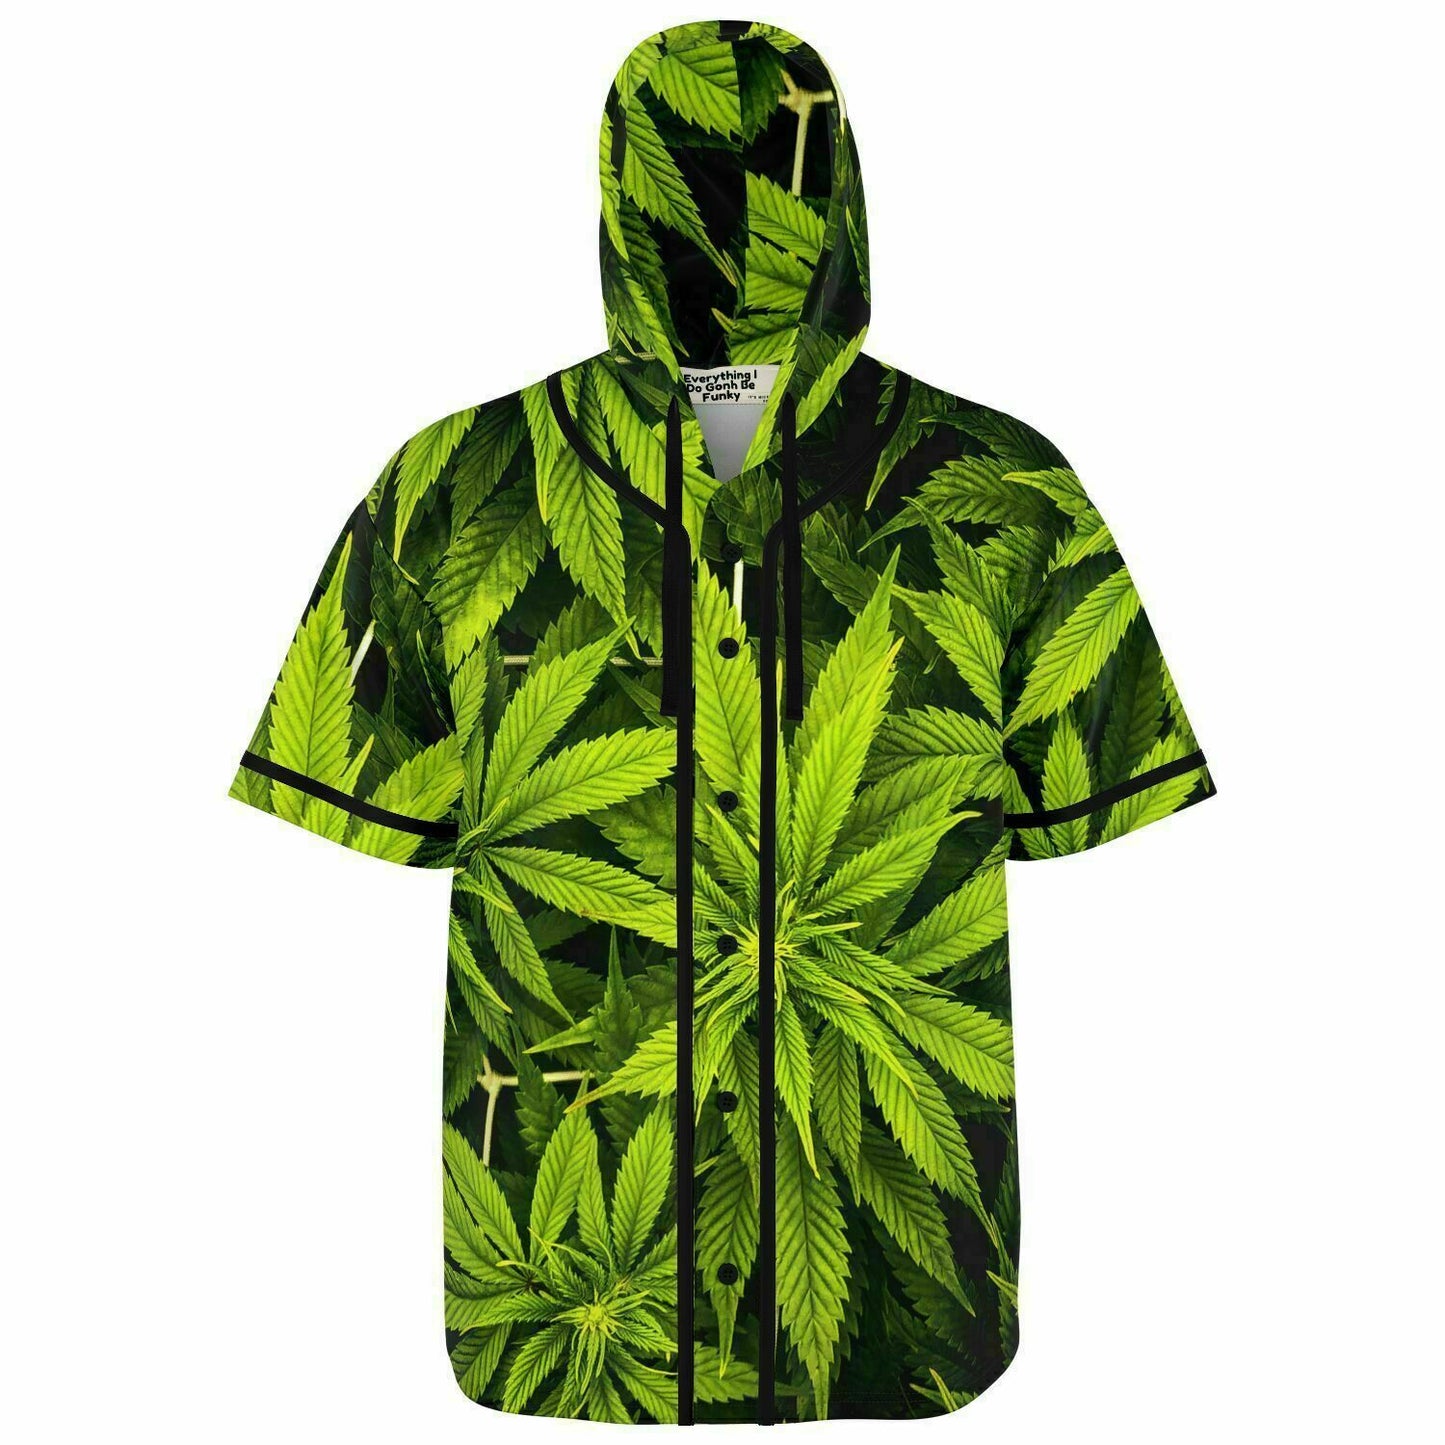 Weed Jersey | Green Apparel